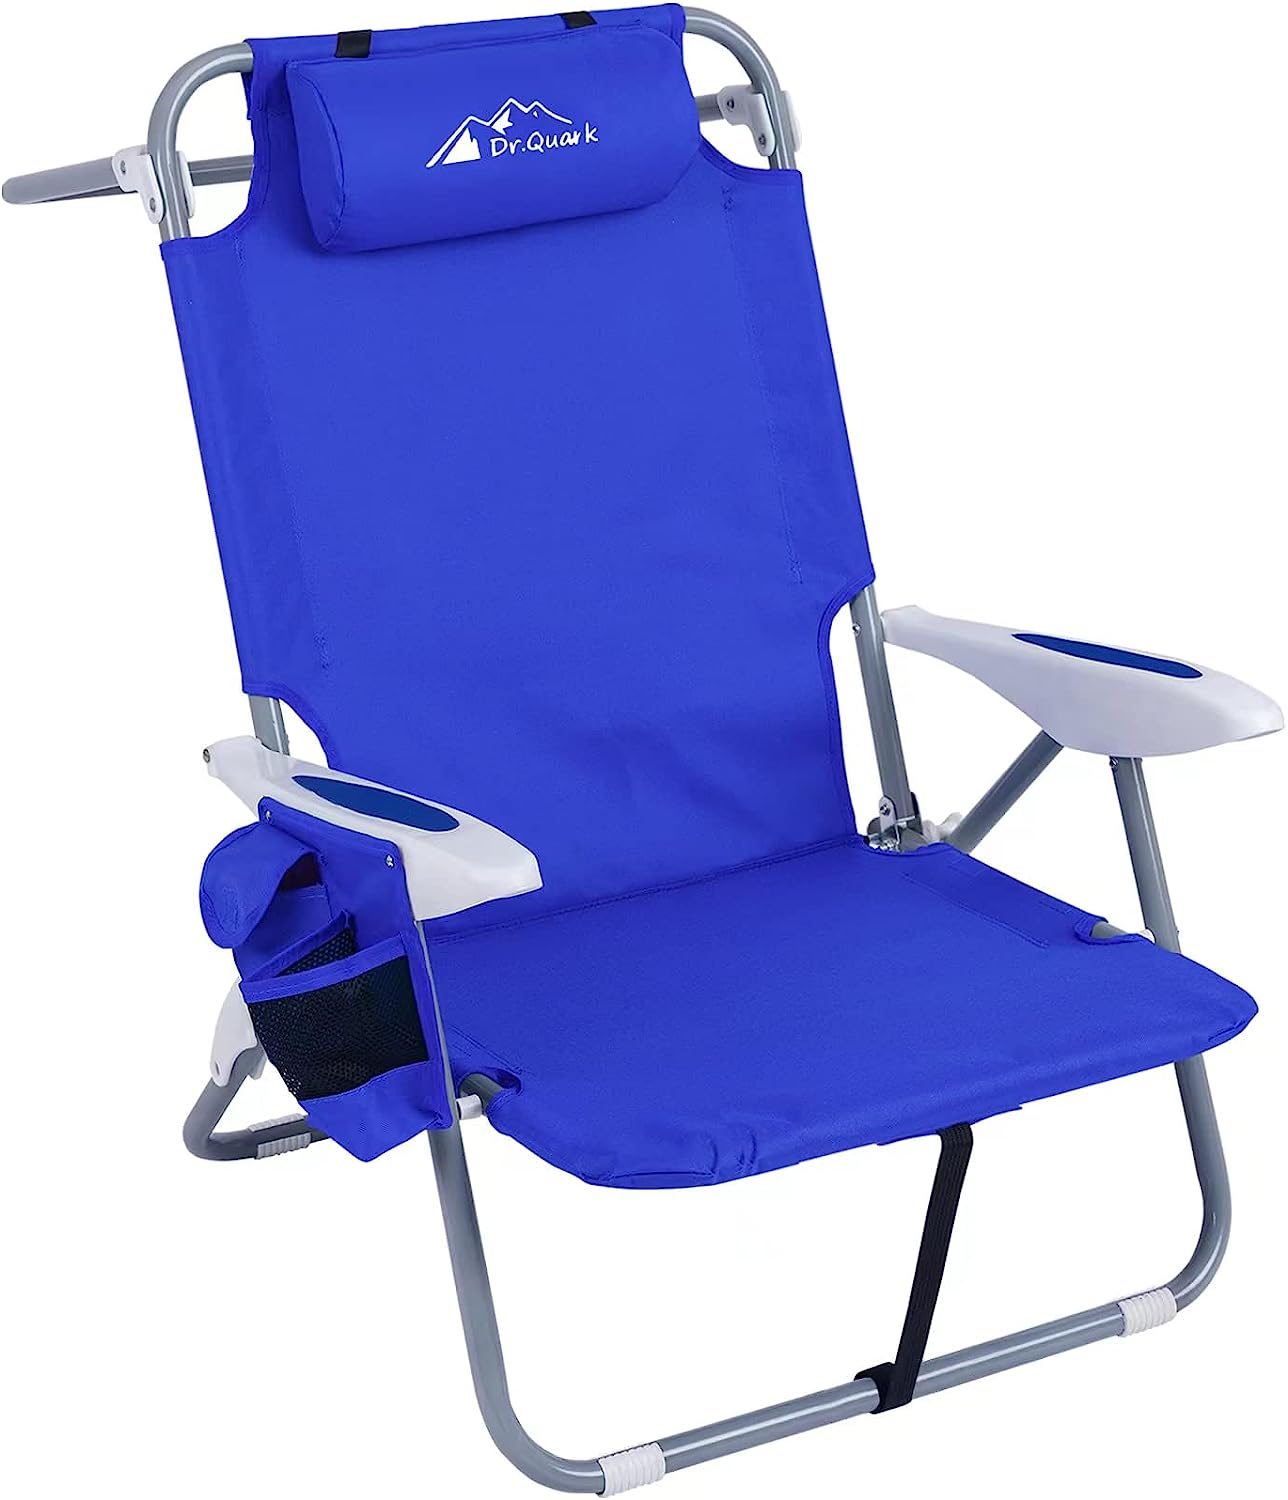 Dr.Quark Beach Chair with Backpack Straps 4-Position [...]